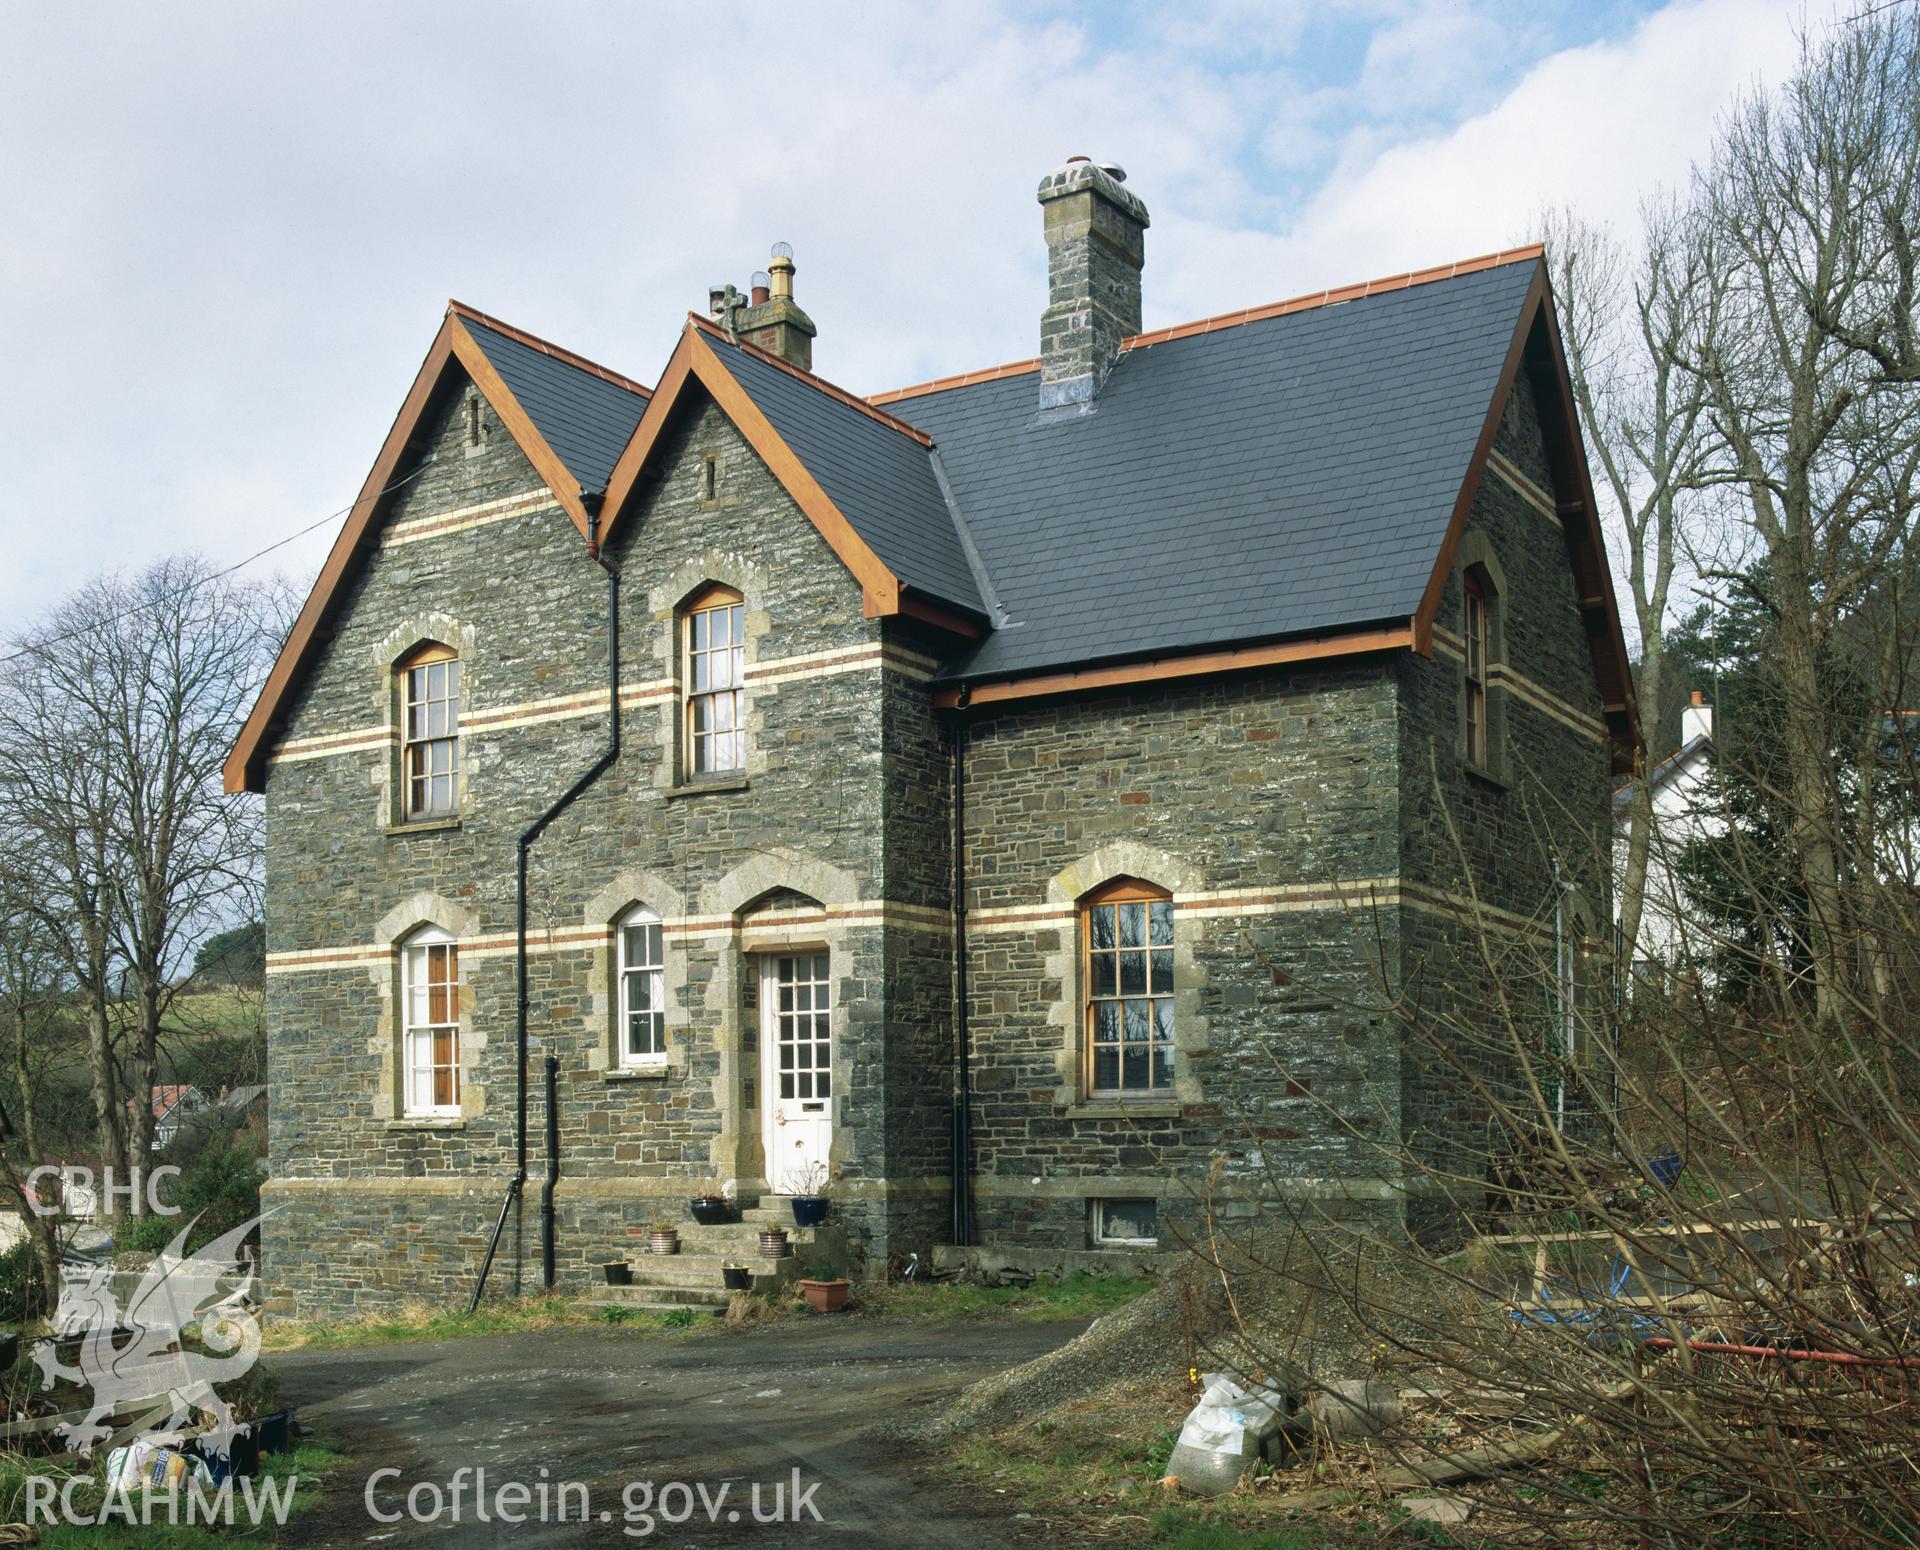 Colour transparency showing the vicarage at Llanbadarn Fawr, produced by Iain Wright, June 2004